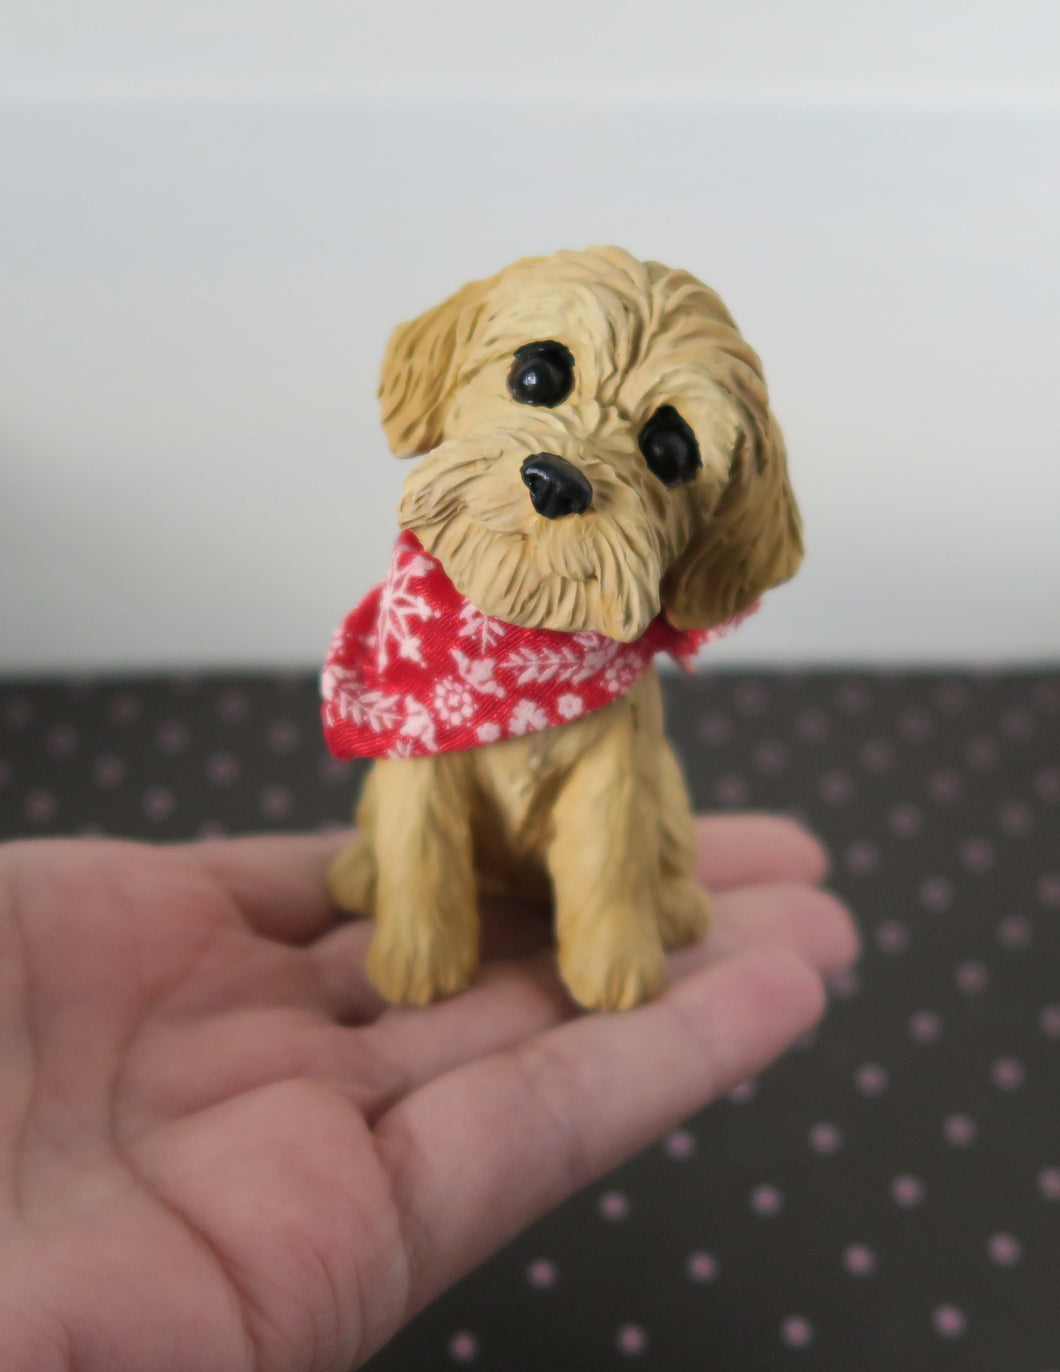 Doodle with bandana, Goldendoodle, Labradoodle, any Poodle mix Handmade Resin Collectible